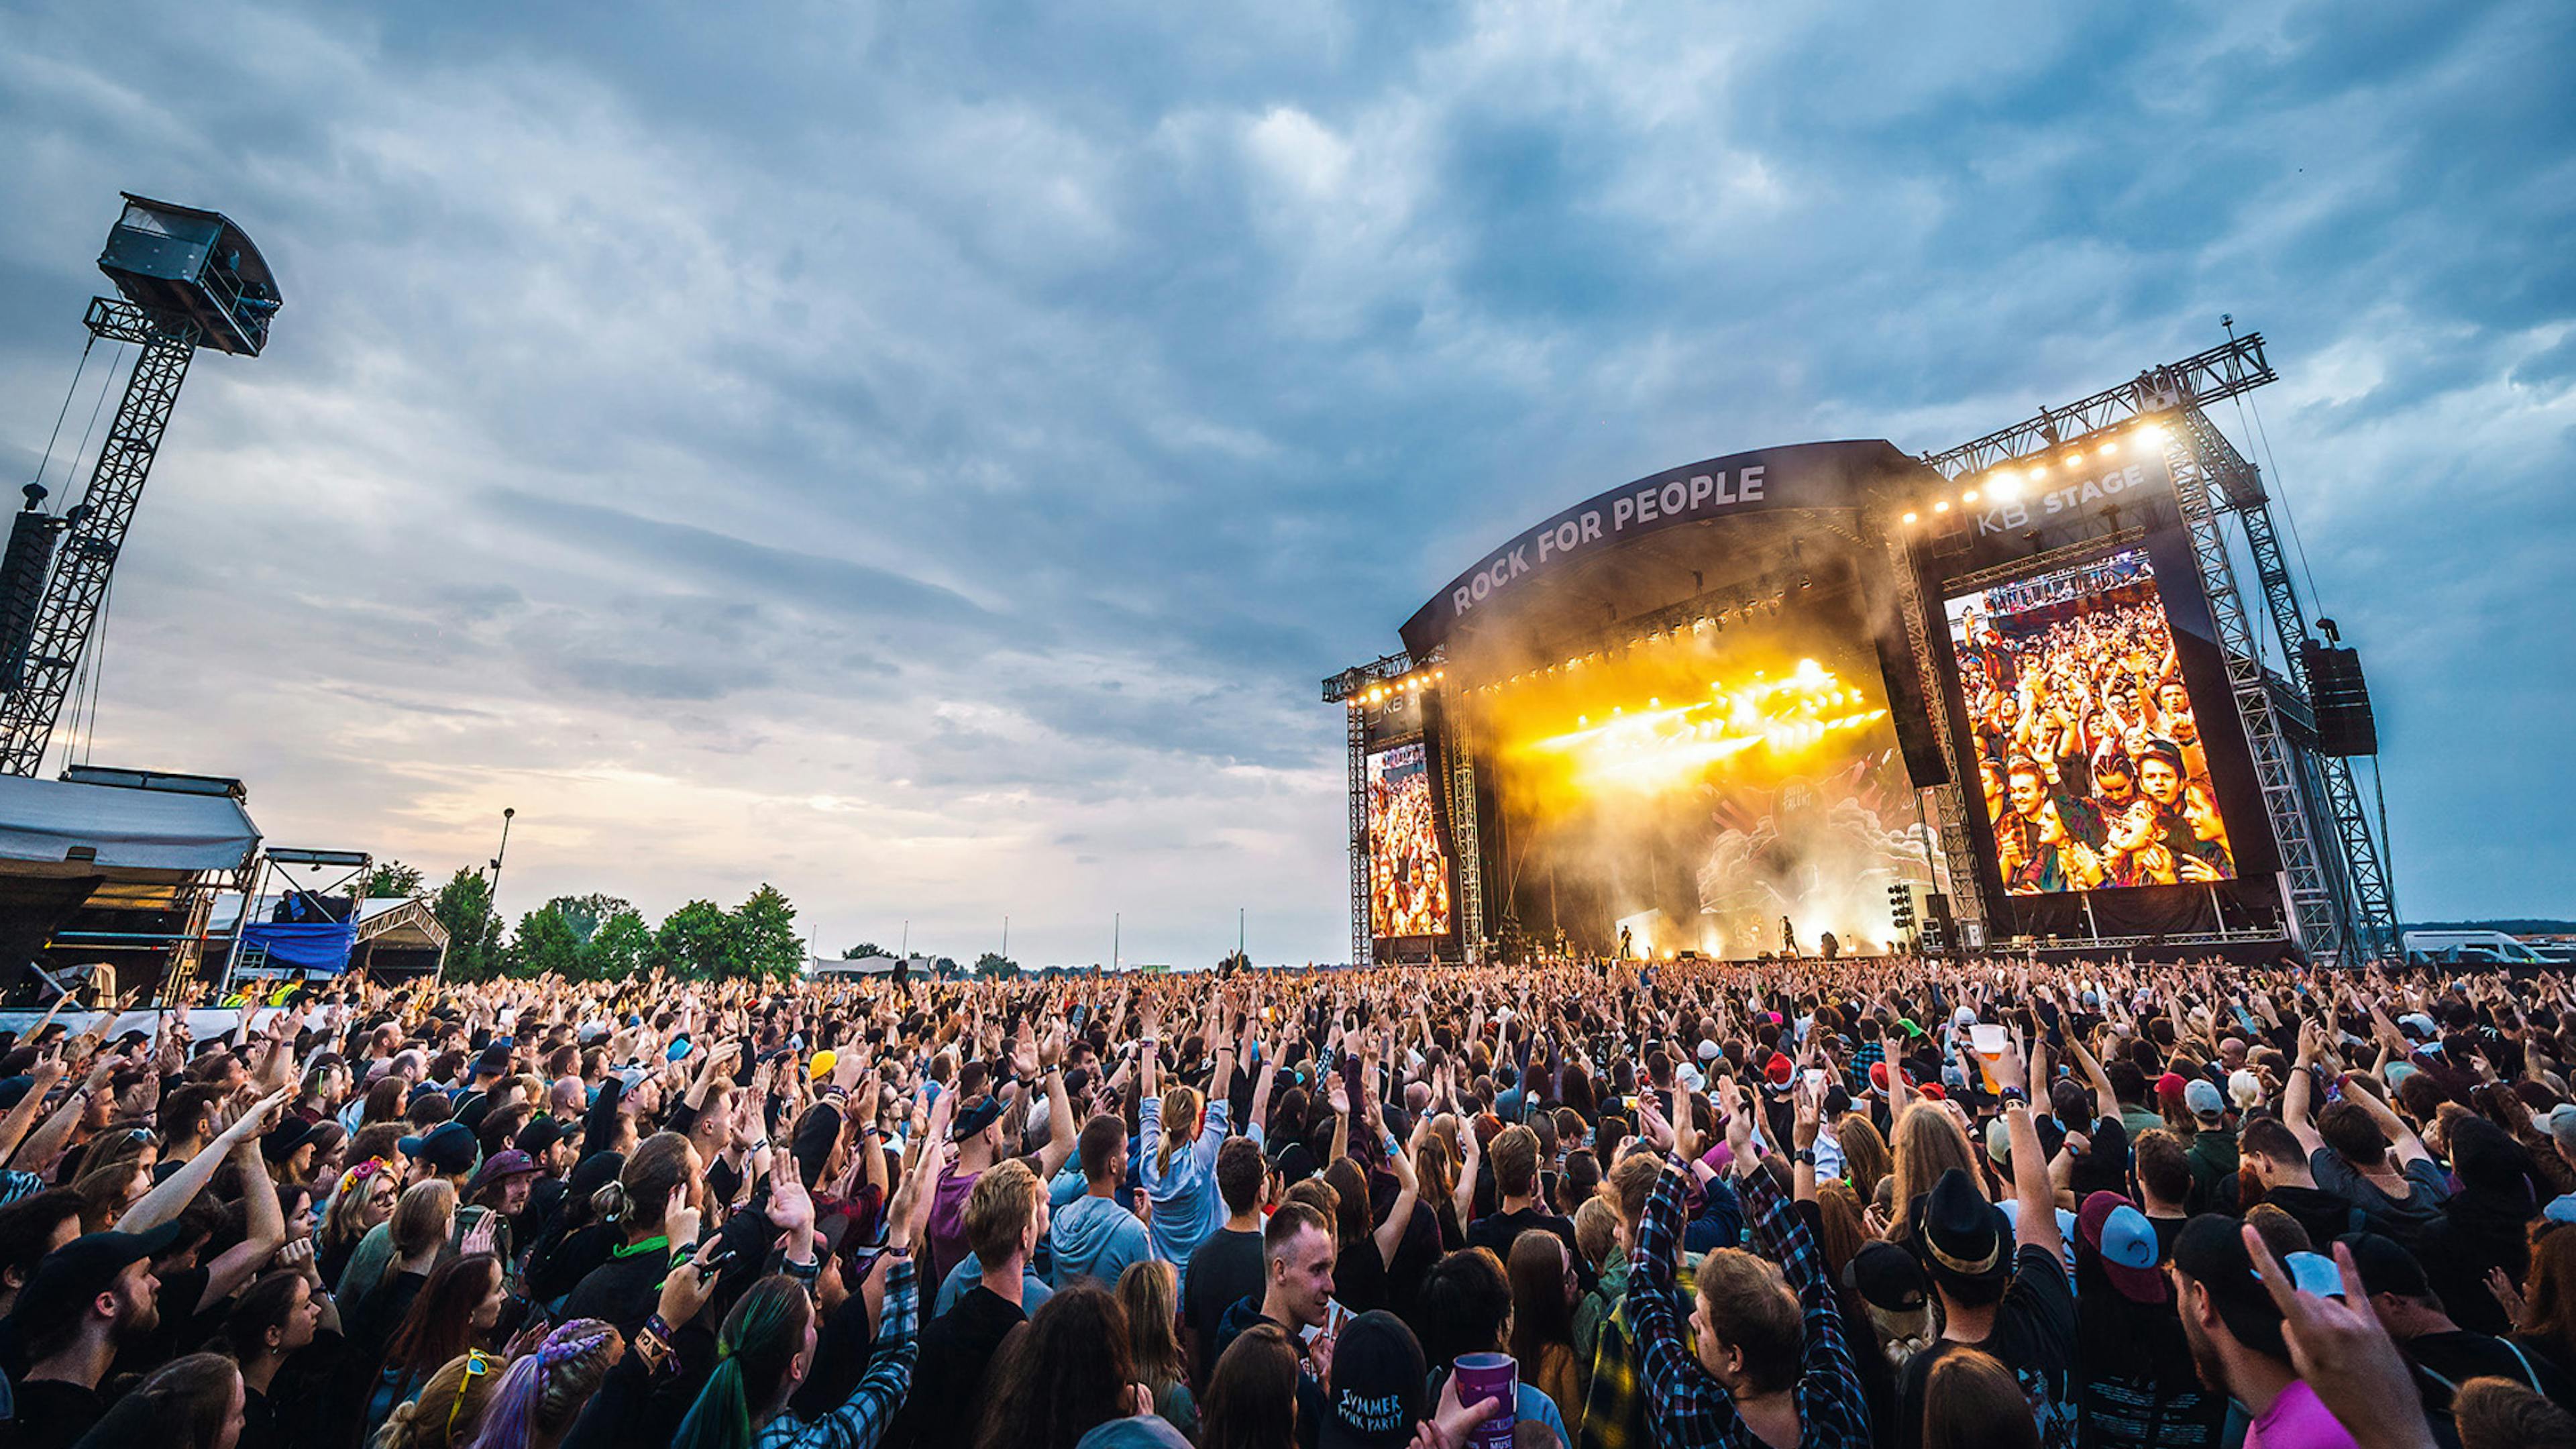 Czech fest Rock For People opens to record-breaking 40,000 fans today